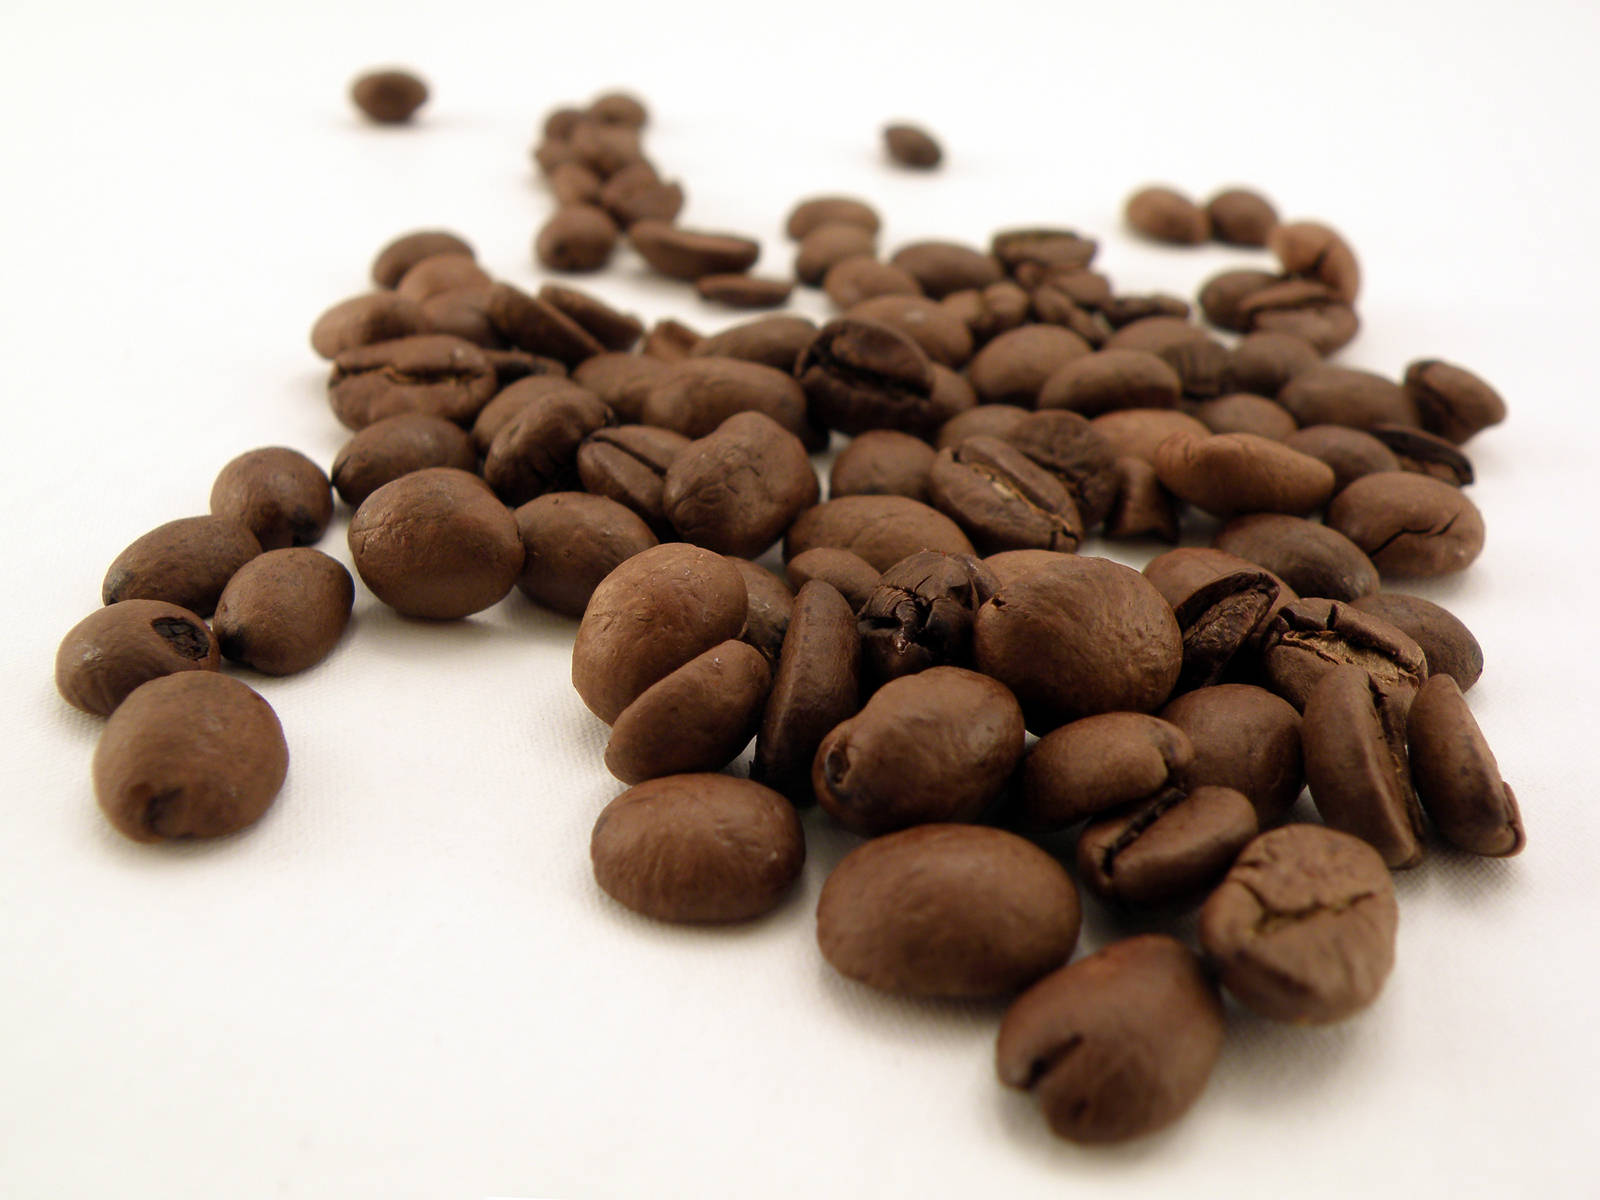 Perpsective Image Of Coffee Beans Wallpaper